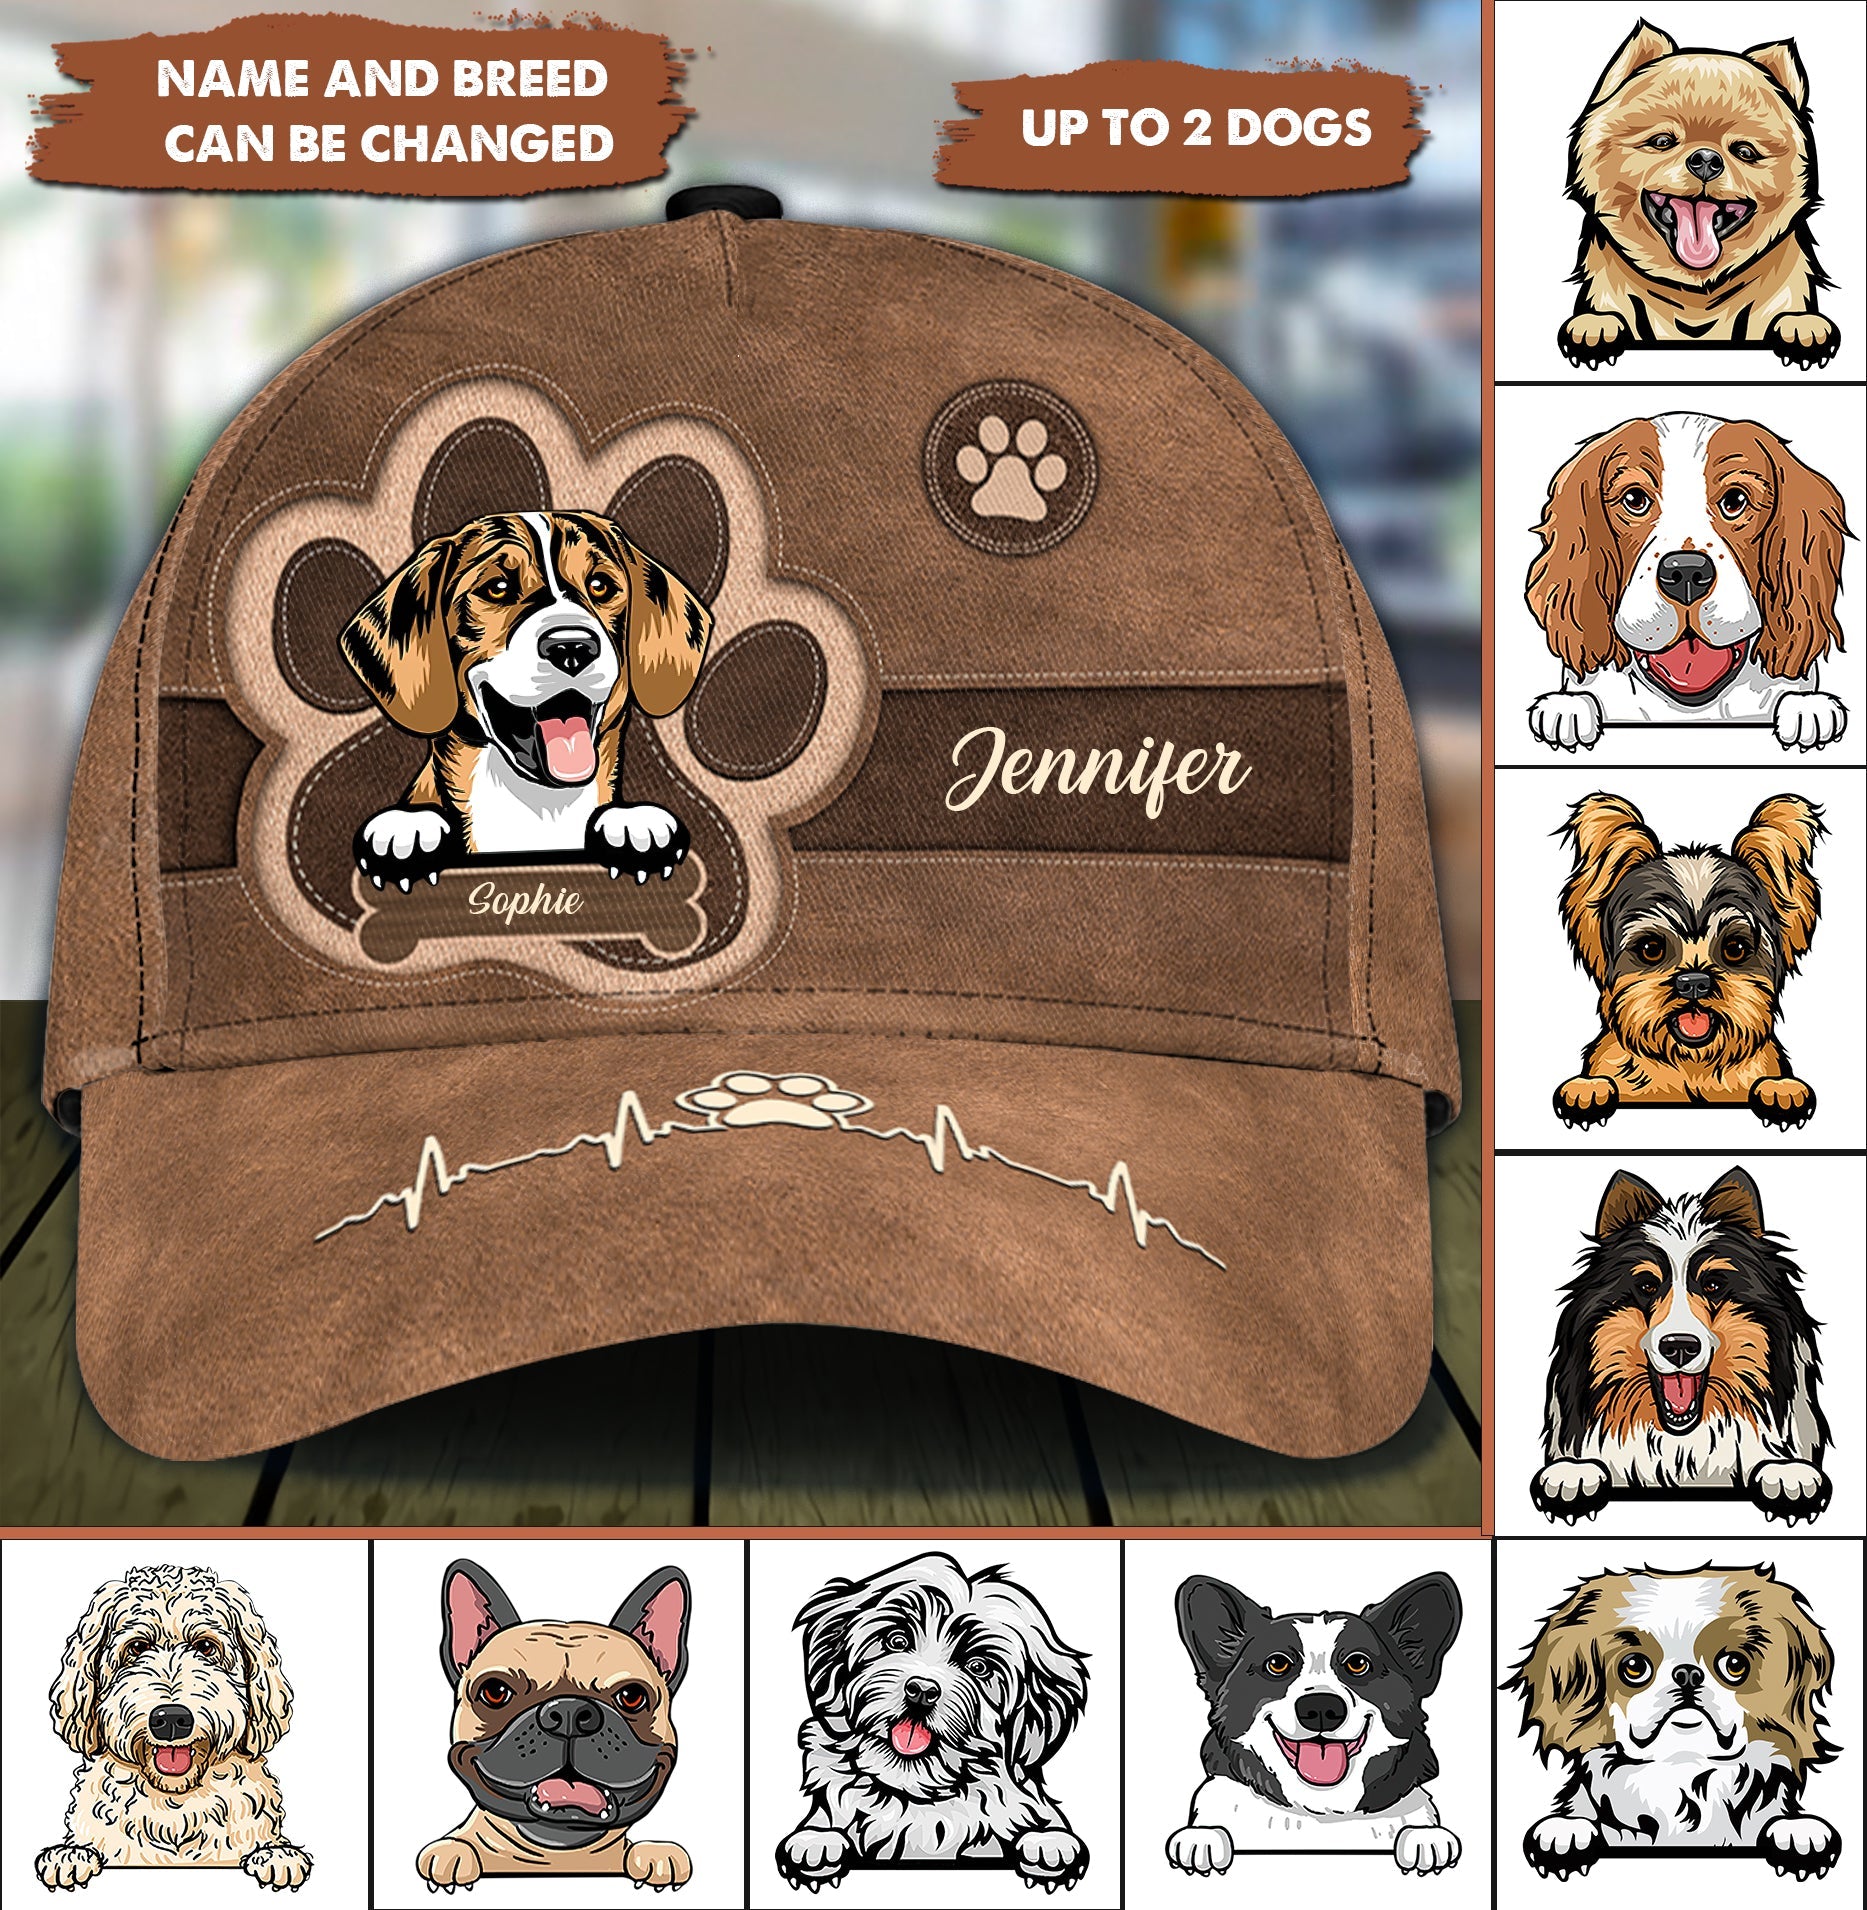 Dog Heartbeat Personalized Classic Cap, Personalized Gift for Dog Lovers, Dog Dad, Dog Mom - CP004PS08